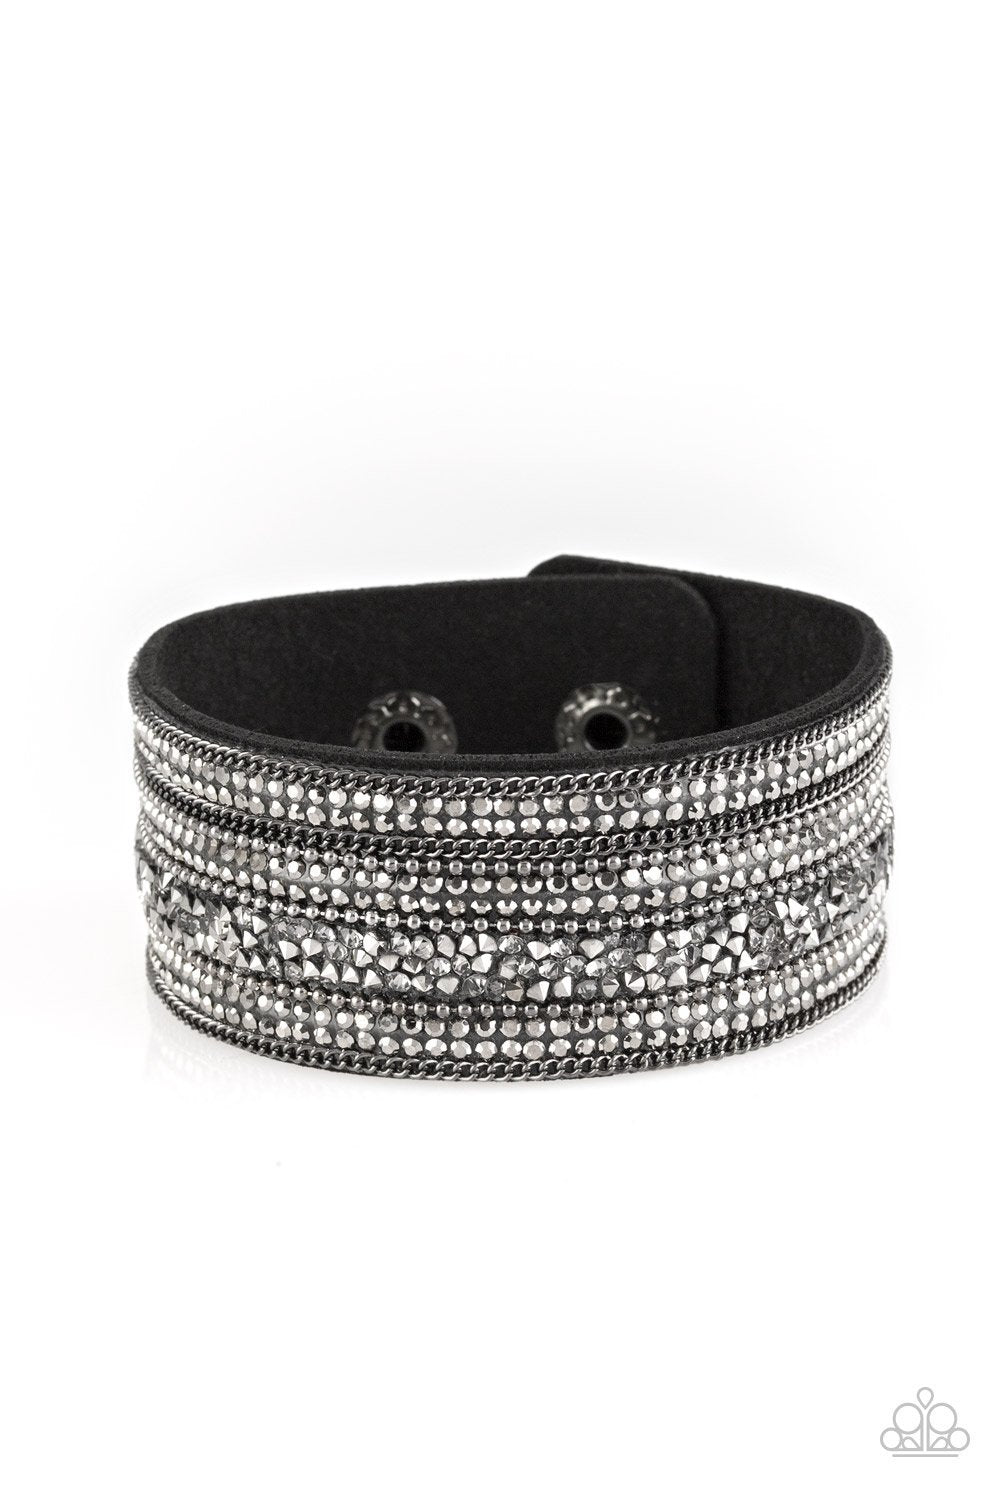 Really Rock Band Black and Gunmetal Urban Wrap Snap Bracelet - Paparazzi Accessories- lightbox - CarasShop.com - $5 Jewelry by Cara Jewels